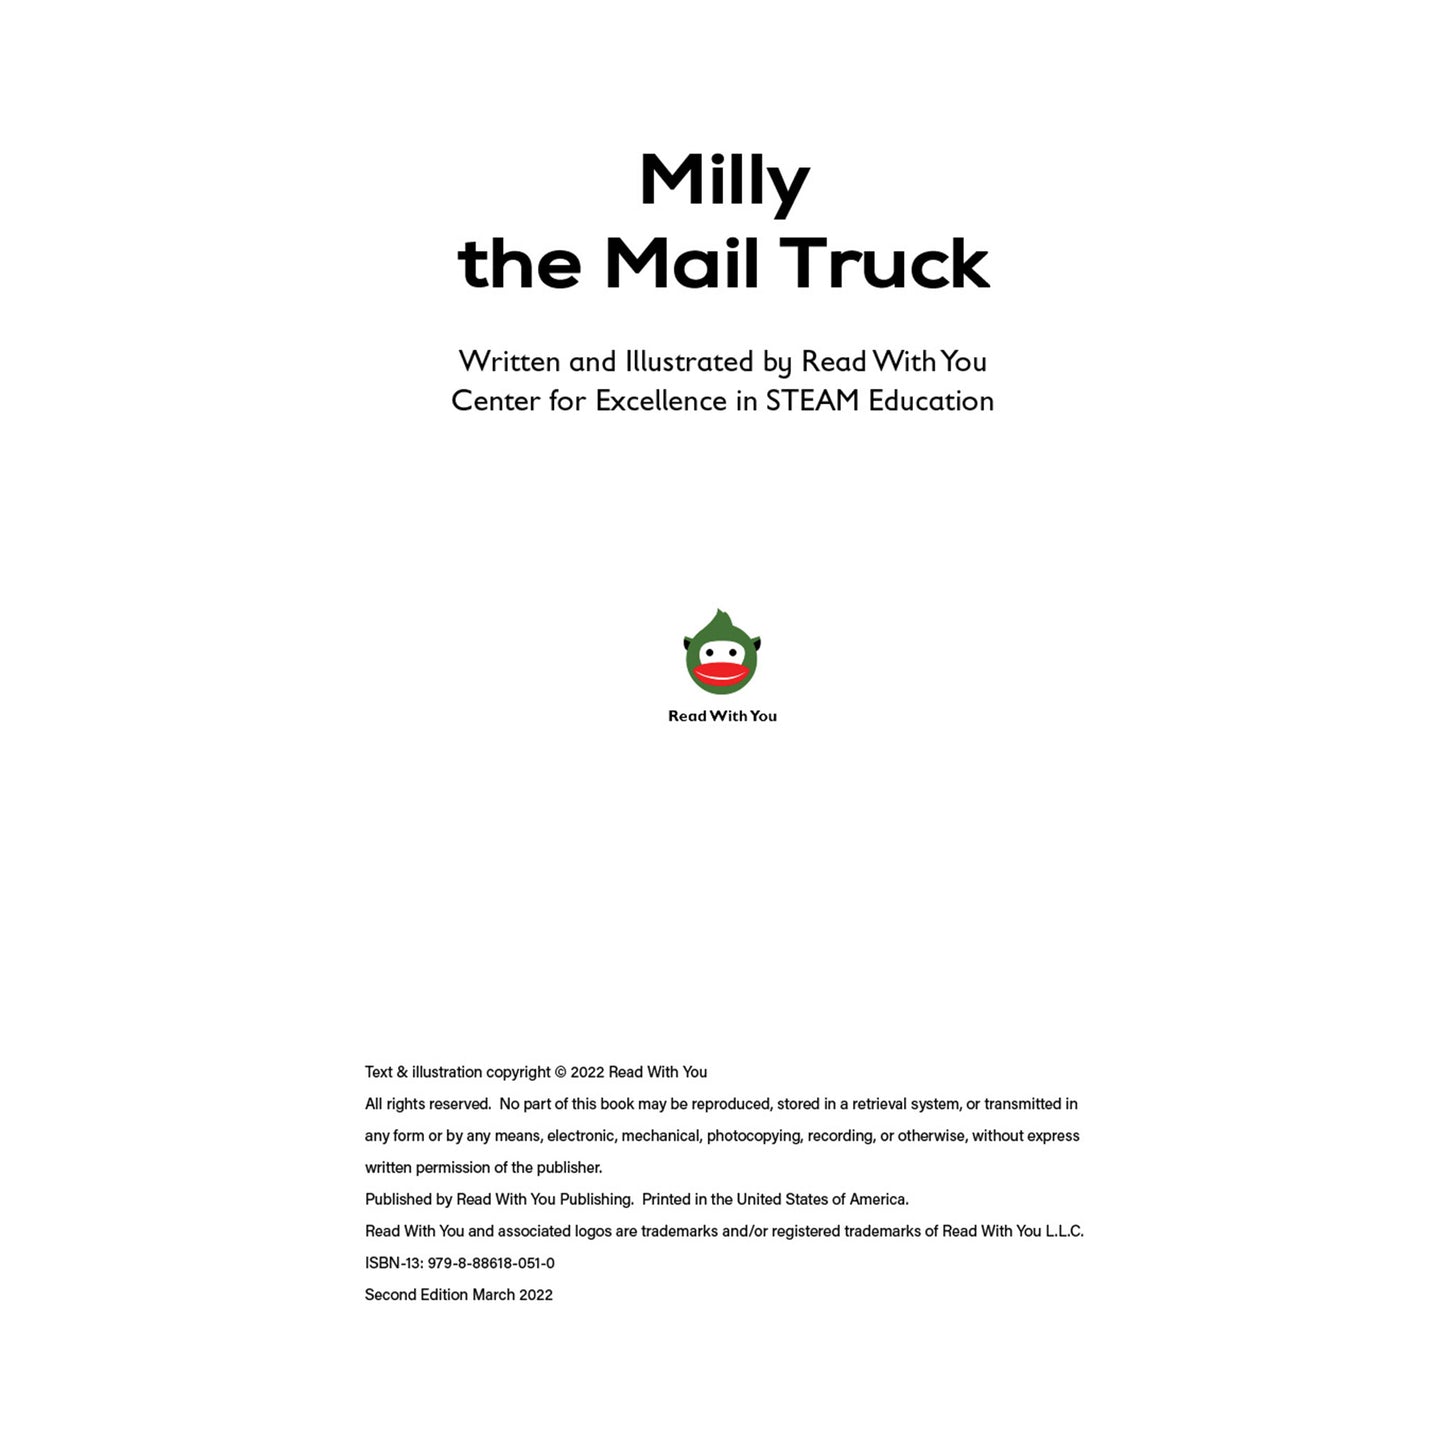 Milly the Mail Truck